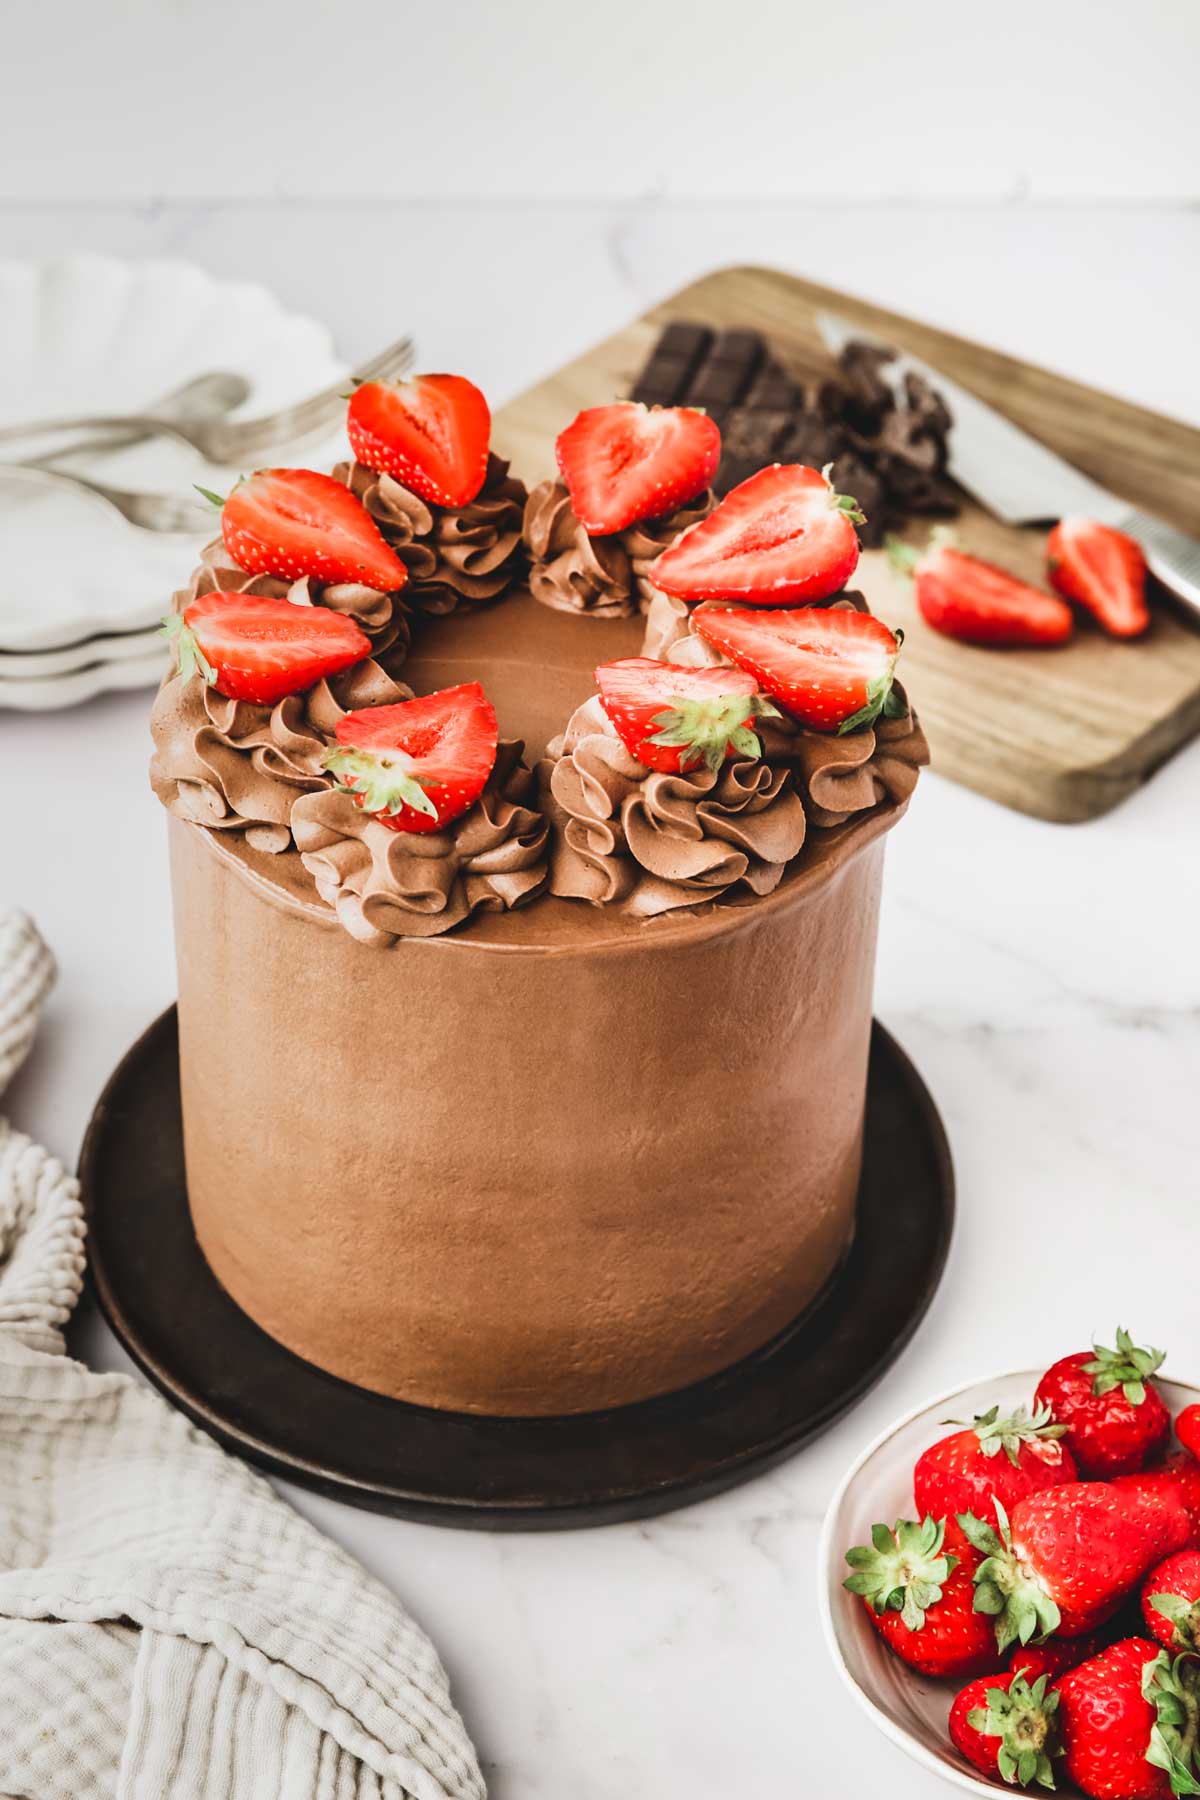 Chocolate and Strawberries Last Minute Cake - Sugar Whipped Cakes Website